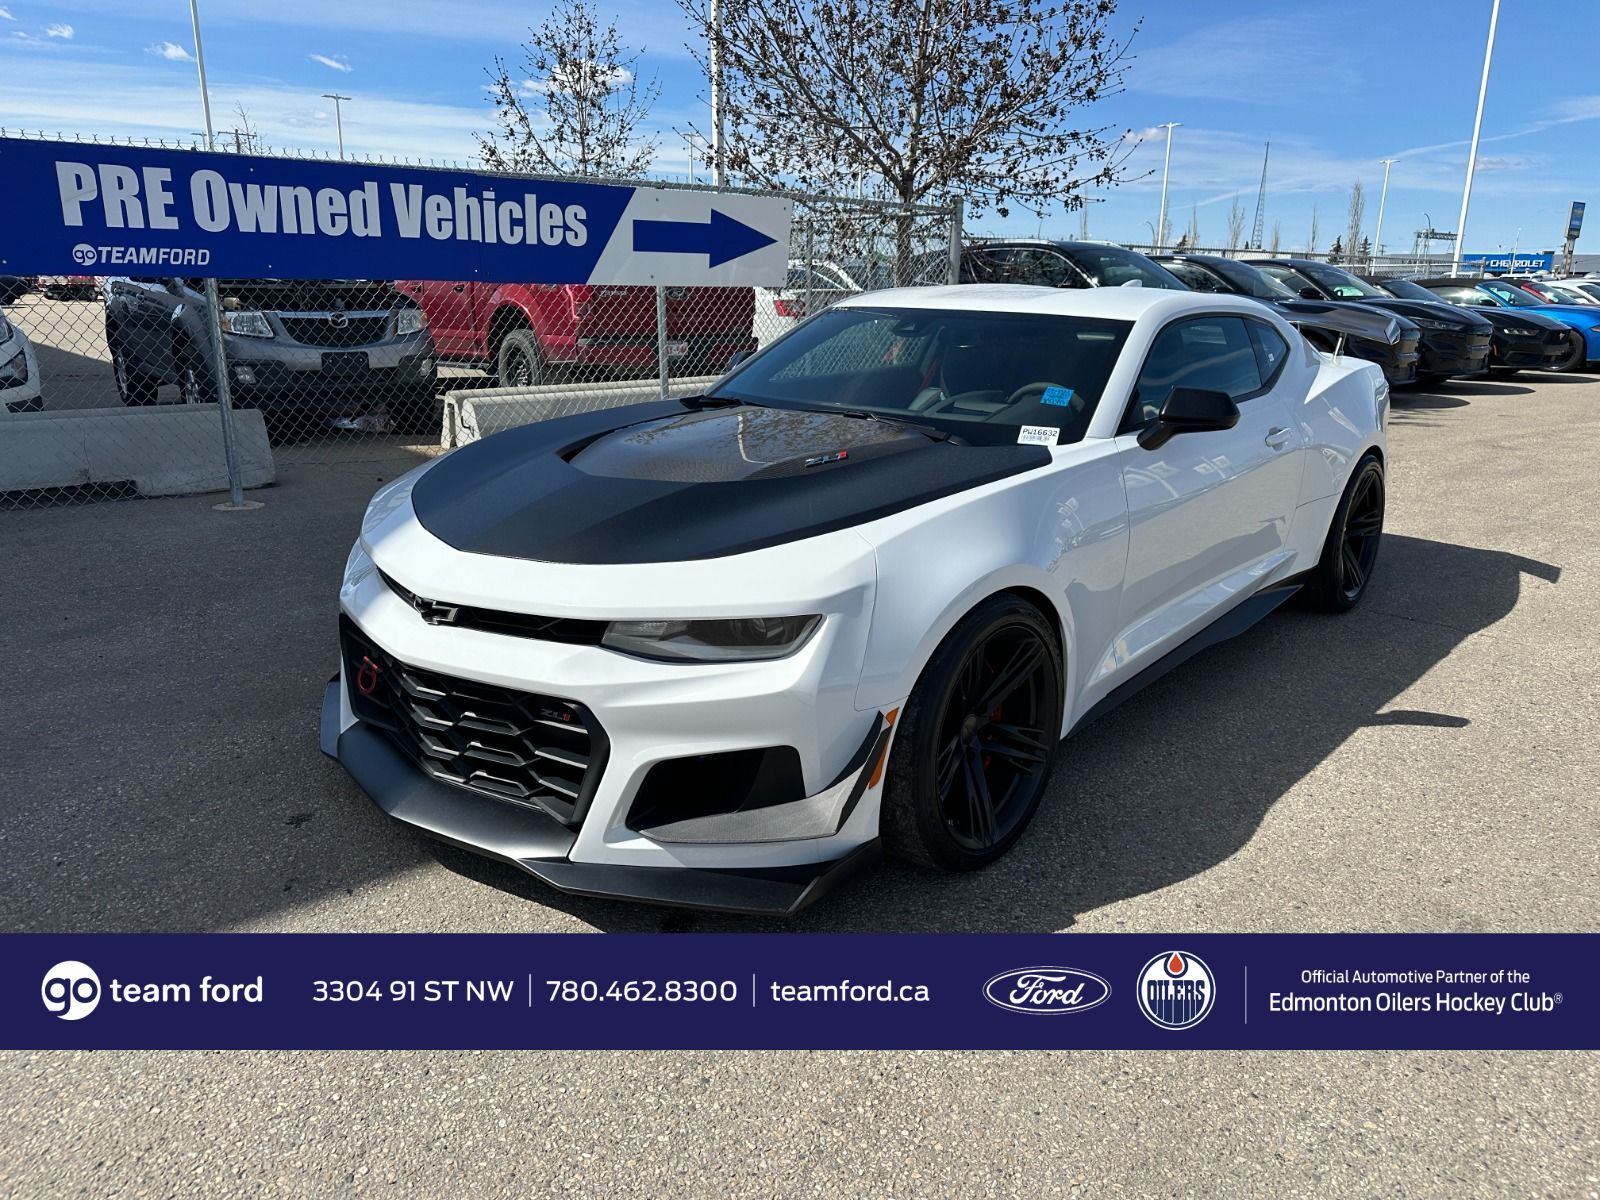 2020 Chevrolet Camaro ZL1 1LE - RED CALIPERS, FRONT SPLITTER, PERFORMANC